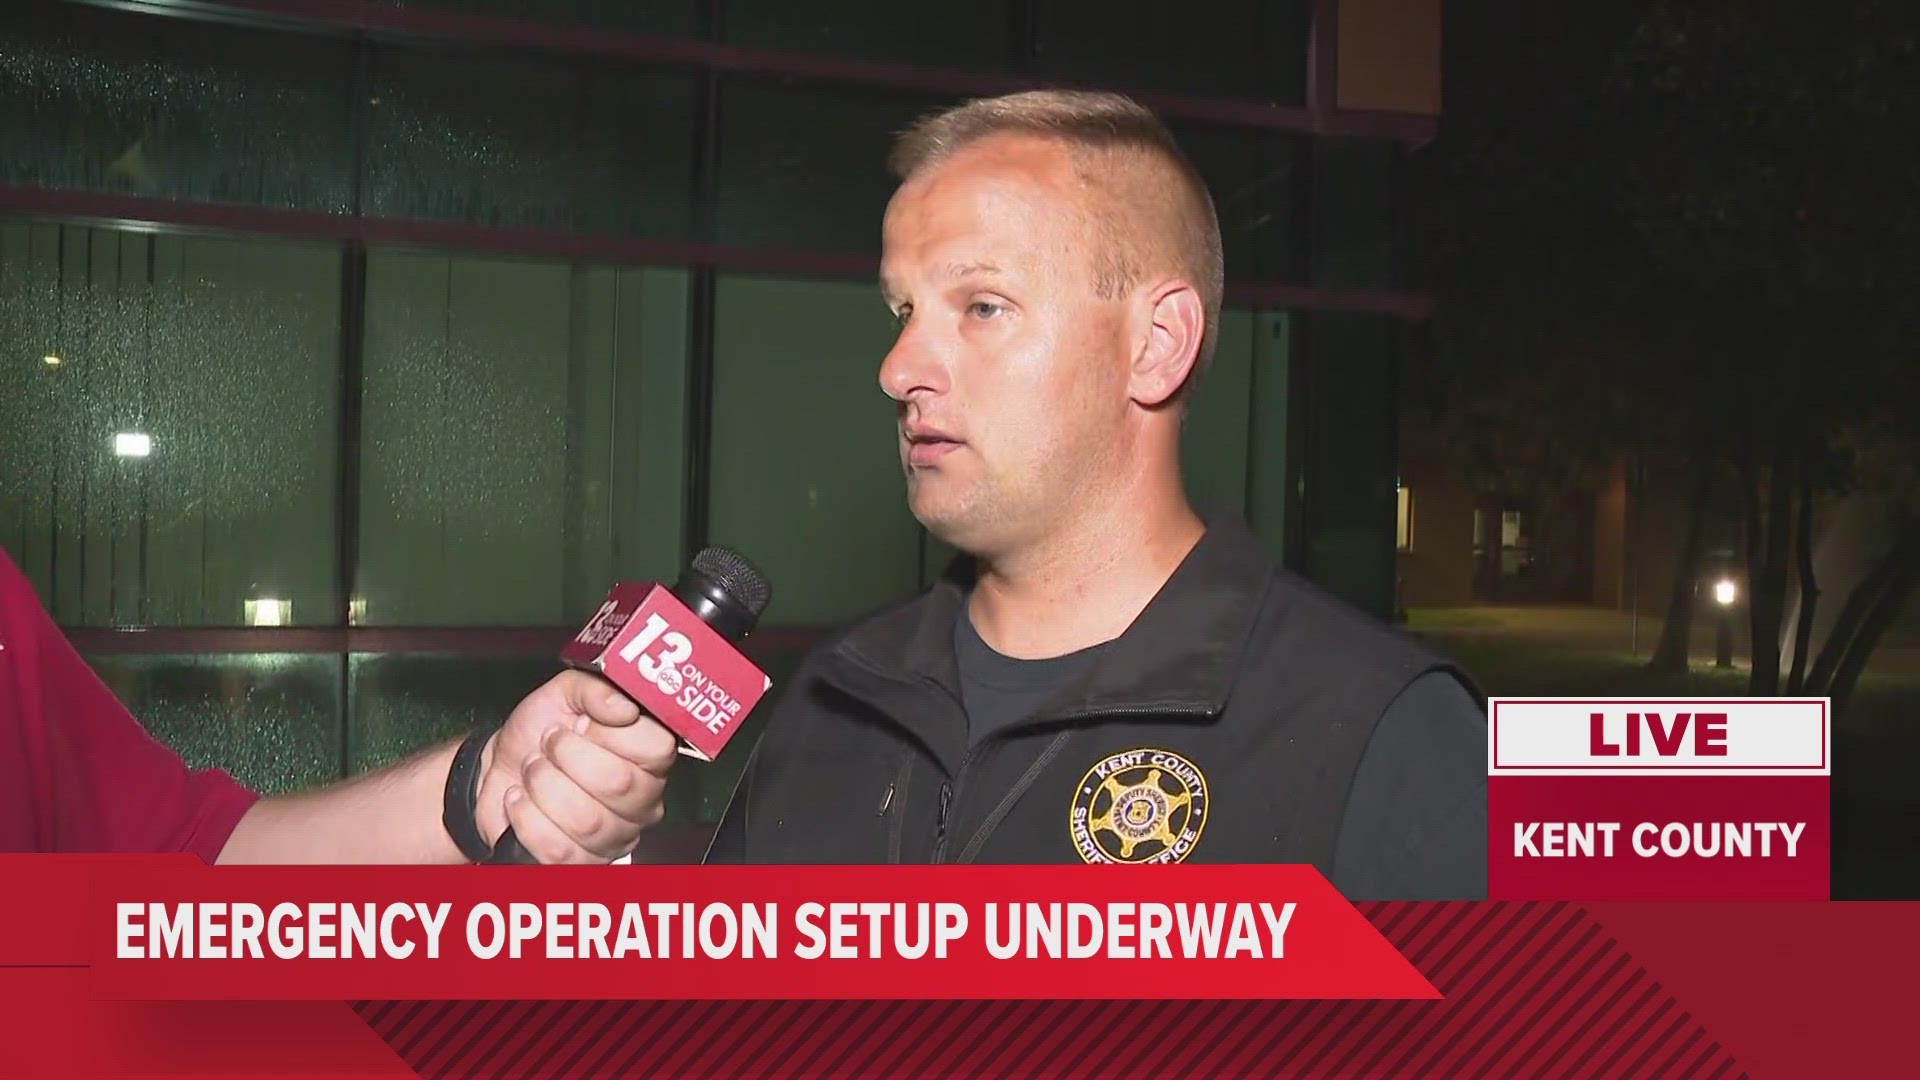 After Thursday nights severe weather 13 ON YOUR SIDE spoke to the Sheriff's Office about what they're doing in the aftermath.